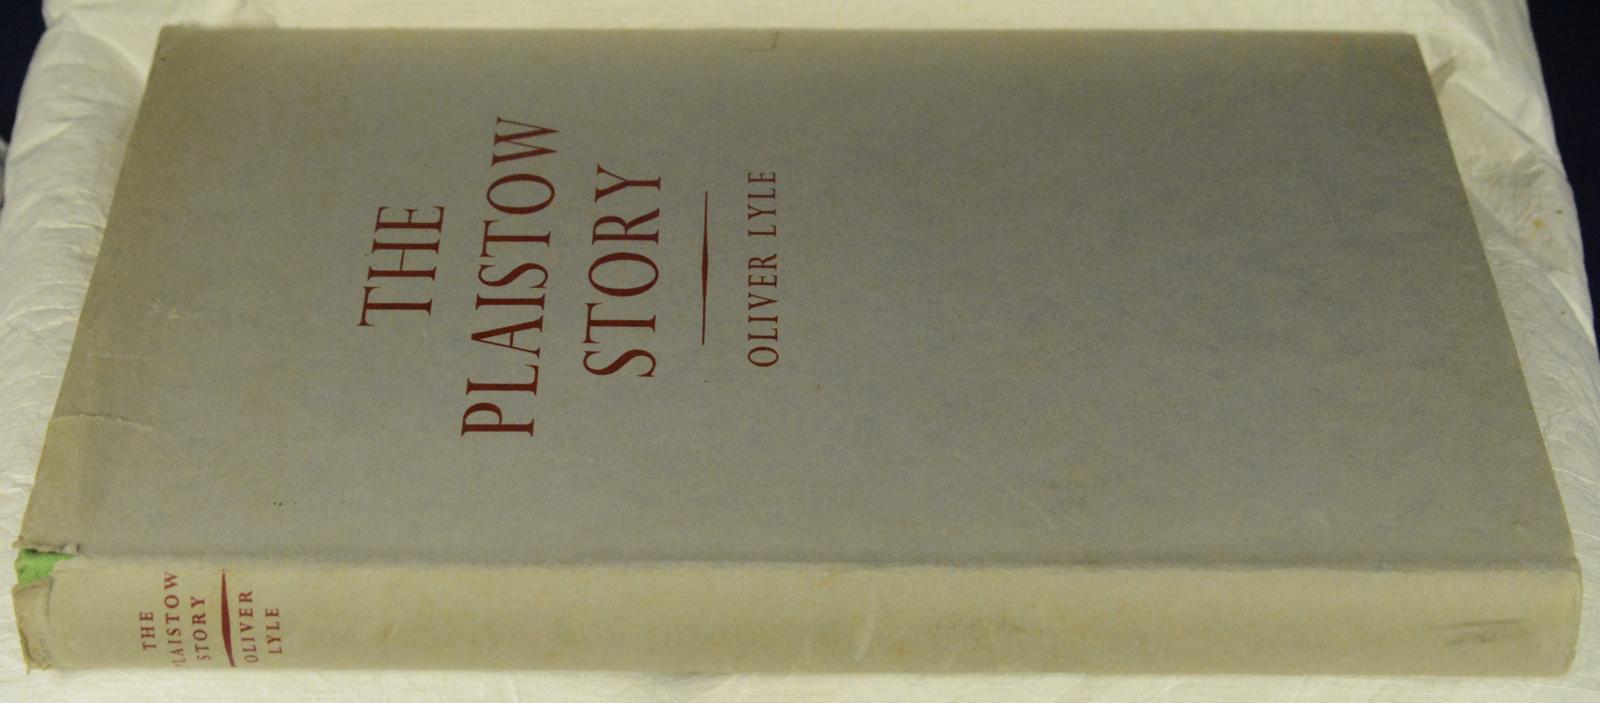 The Plaistow Story by Lyle, Oliver: Very Good Hardcover (1960) 1st ...